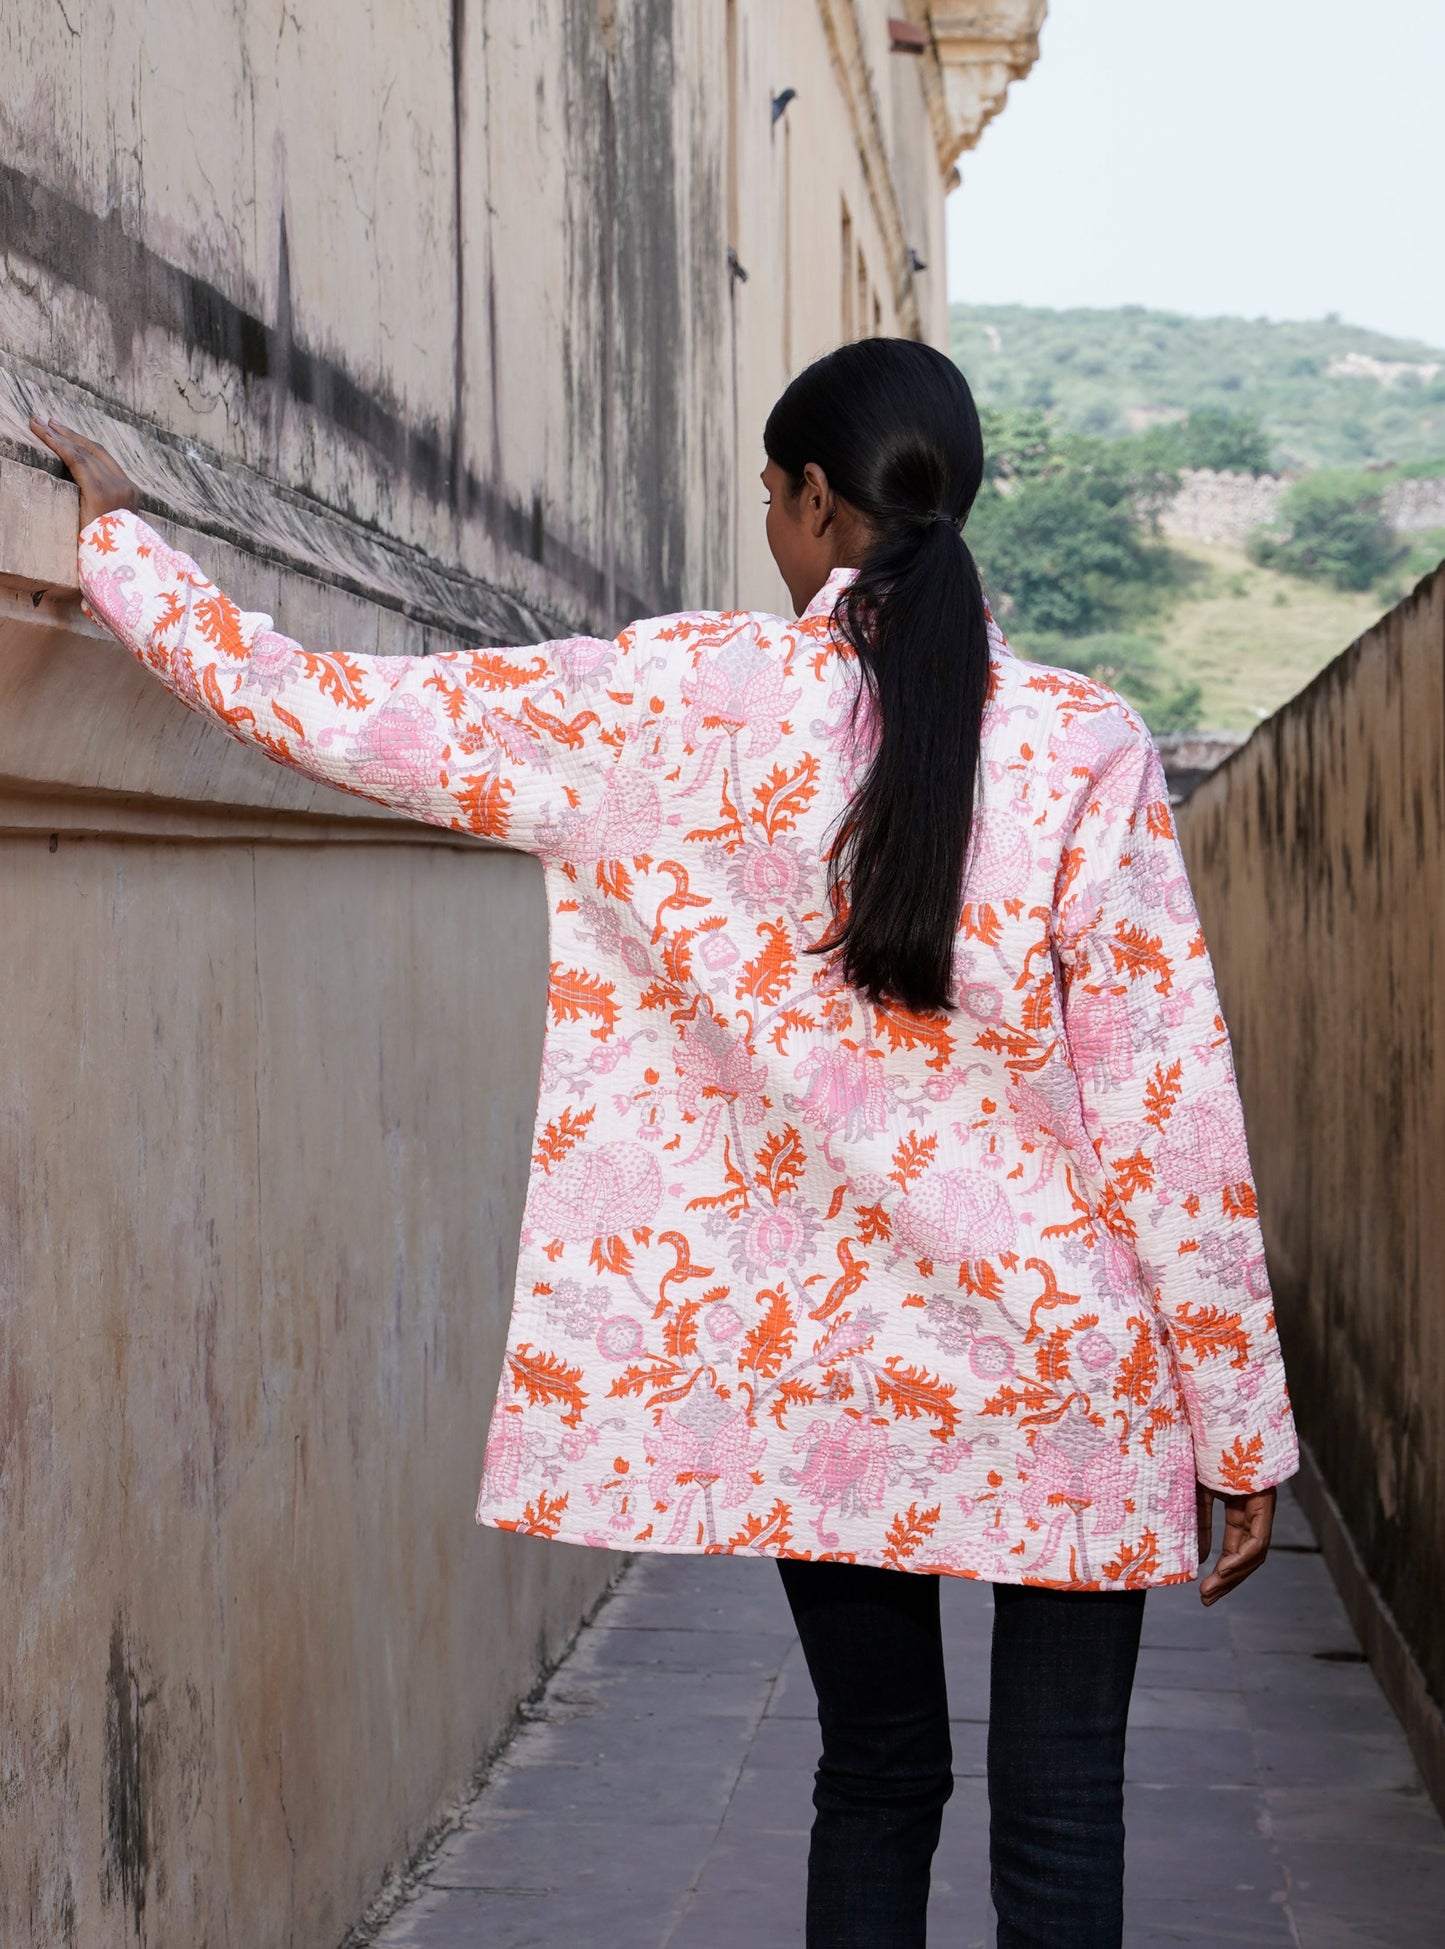 Quilted women's cotton kimono jacket with floral design